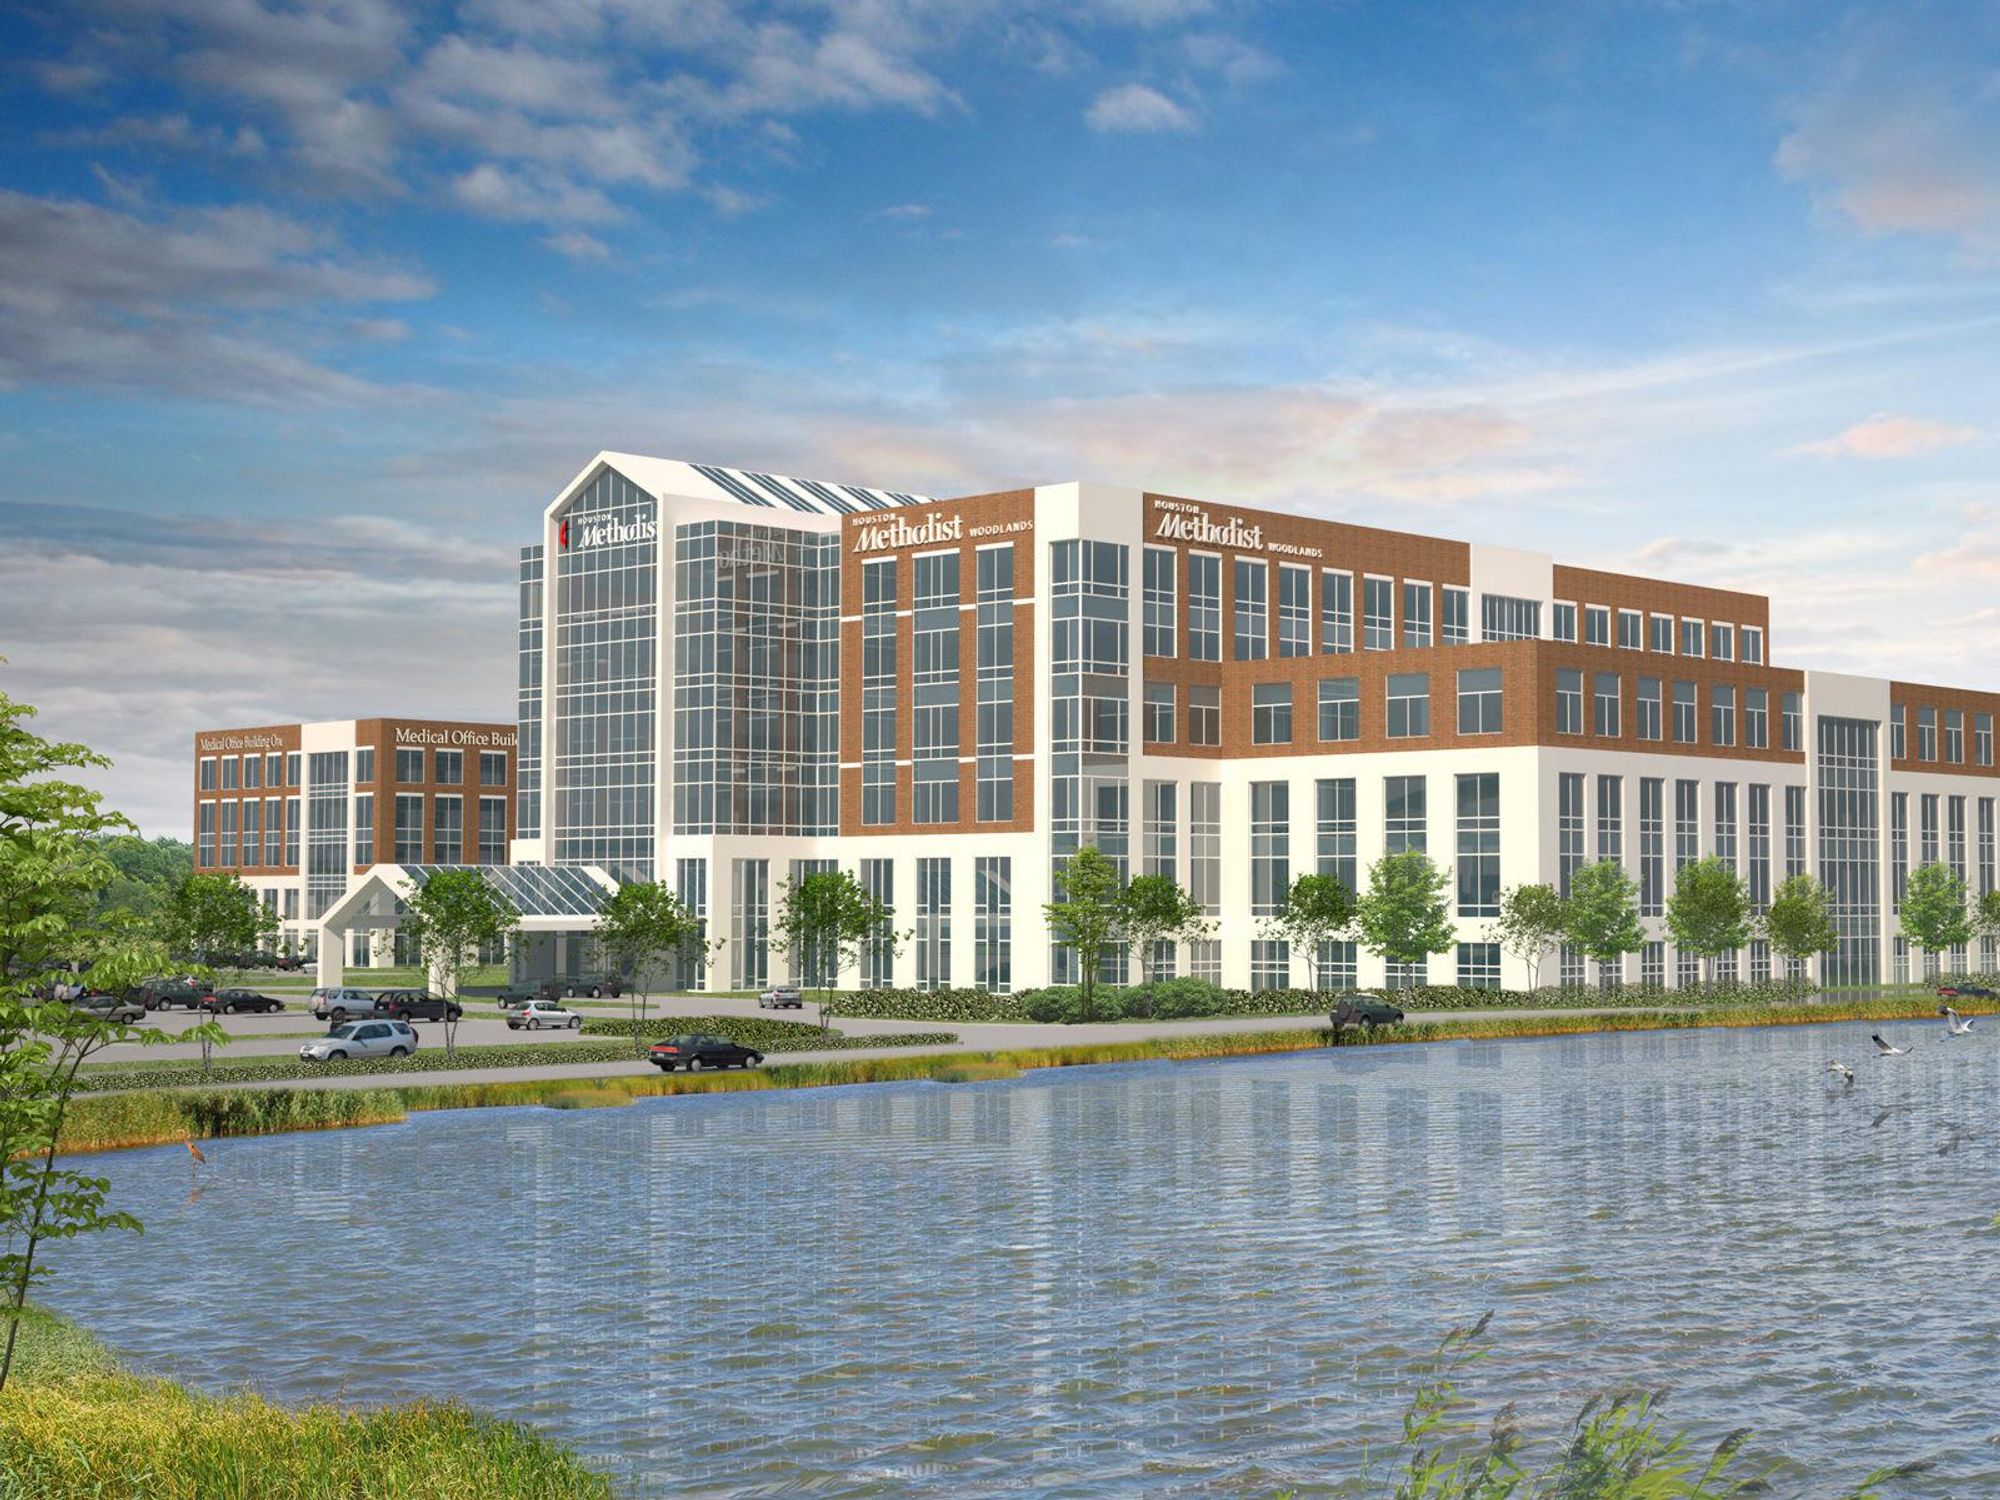 Houston Methodist Hospital in The Woodlands rendering May 2014 exterior day with pond